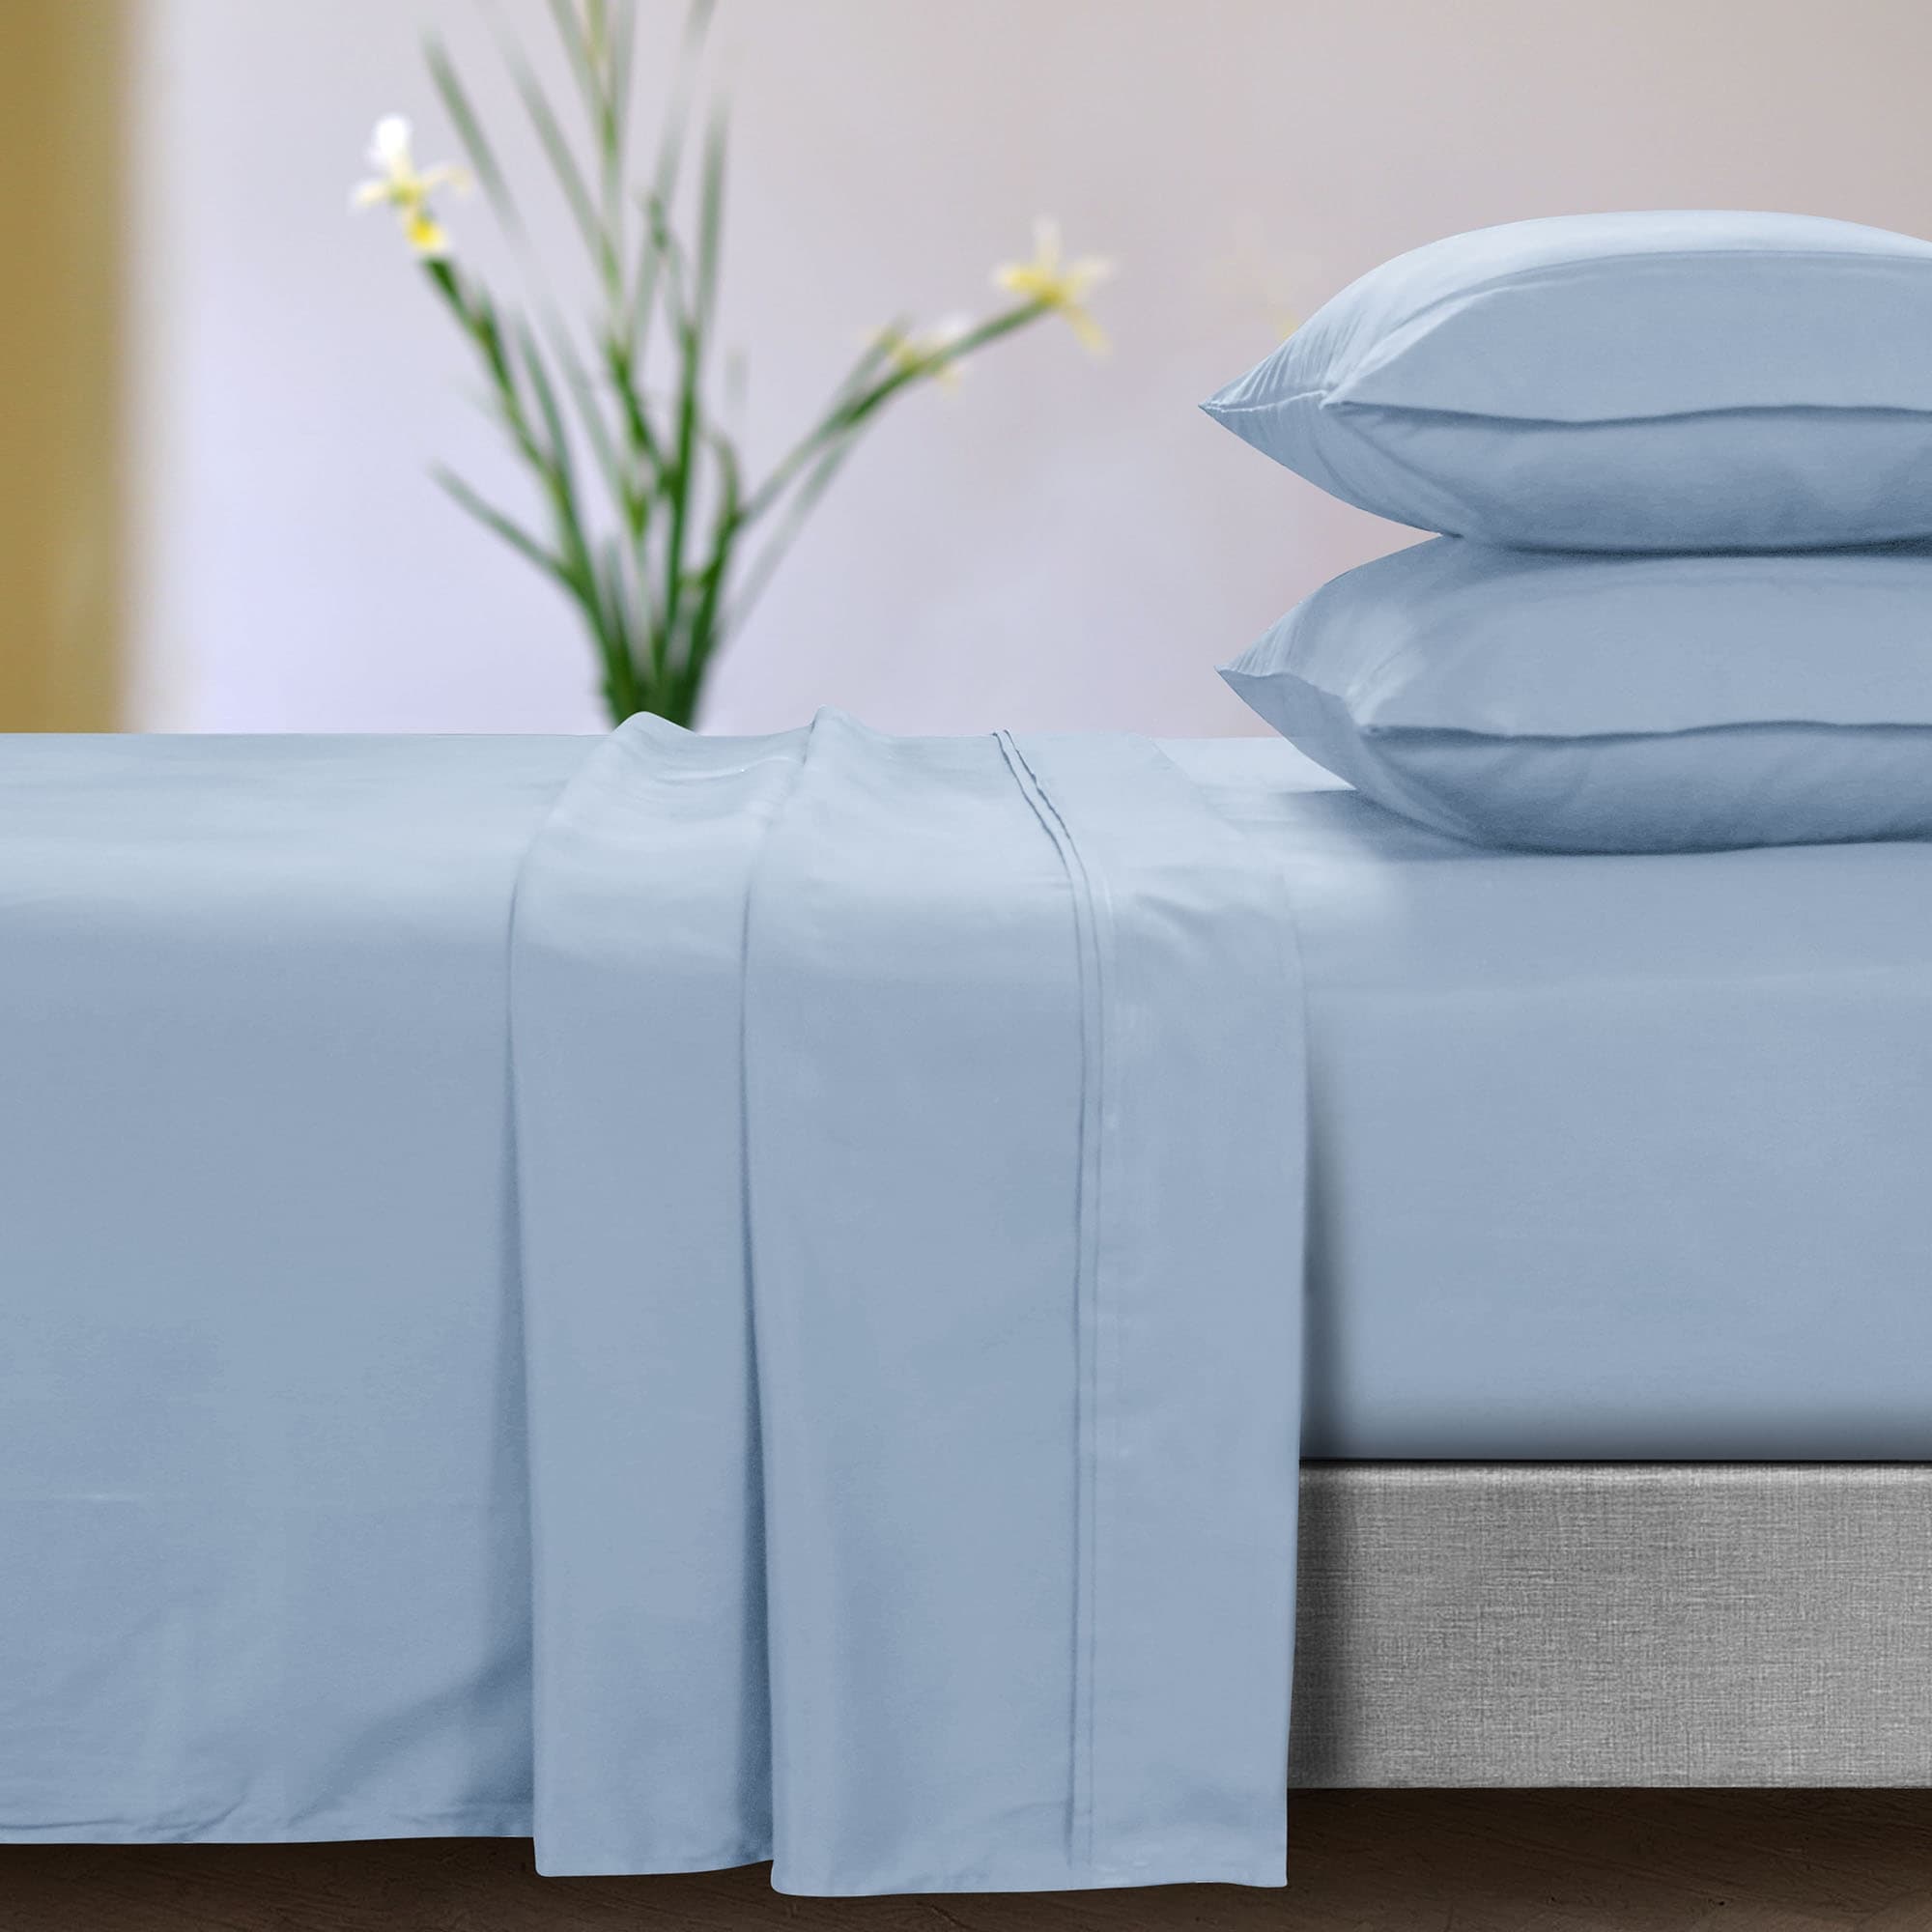 https://ak1.ostkcdn.com/images/products/is/images/direct/15aa75b4cd6d9f4e961b09f646e90da8e0b83154/Super-Soft-Extra-Deep-Pocket-Bed-Sheet-Set-with-Oversize-Flat.jpg